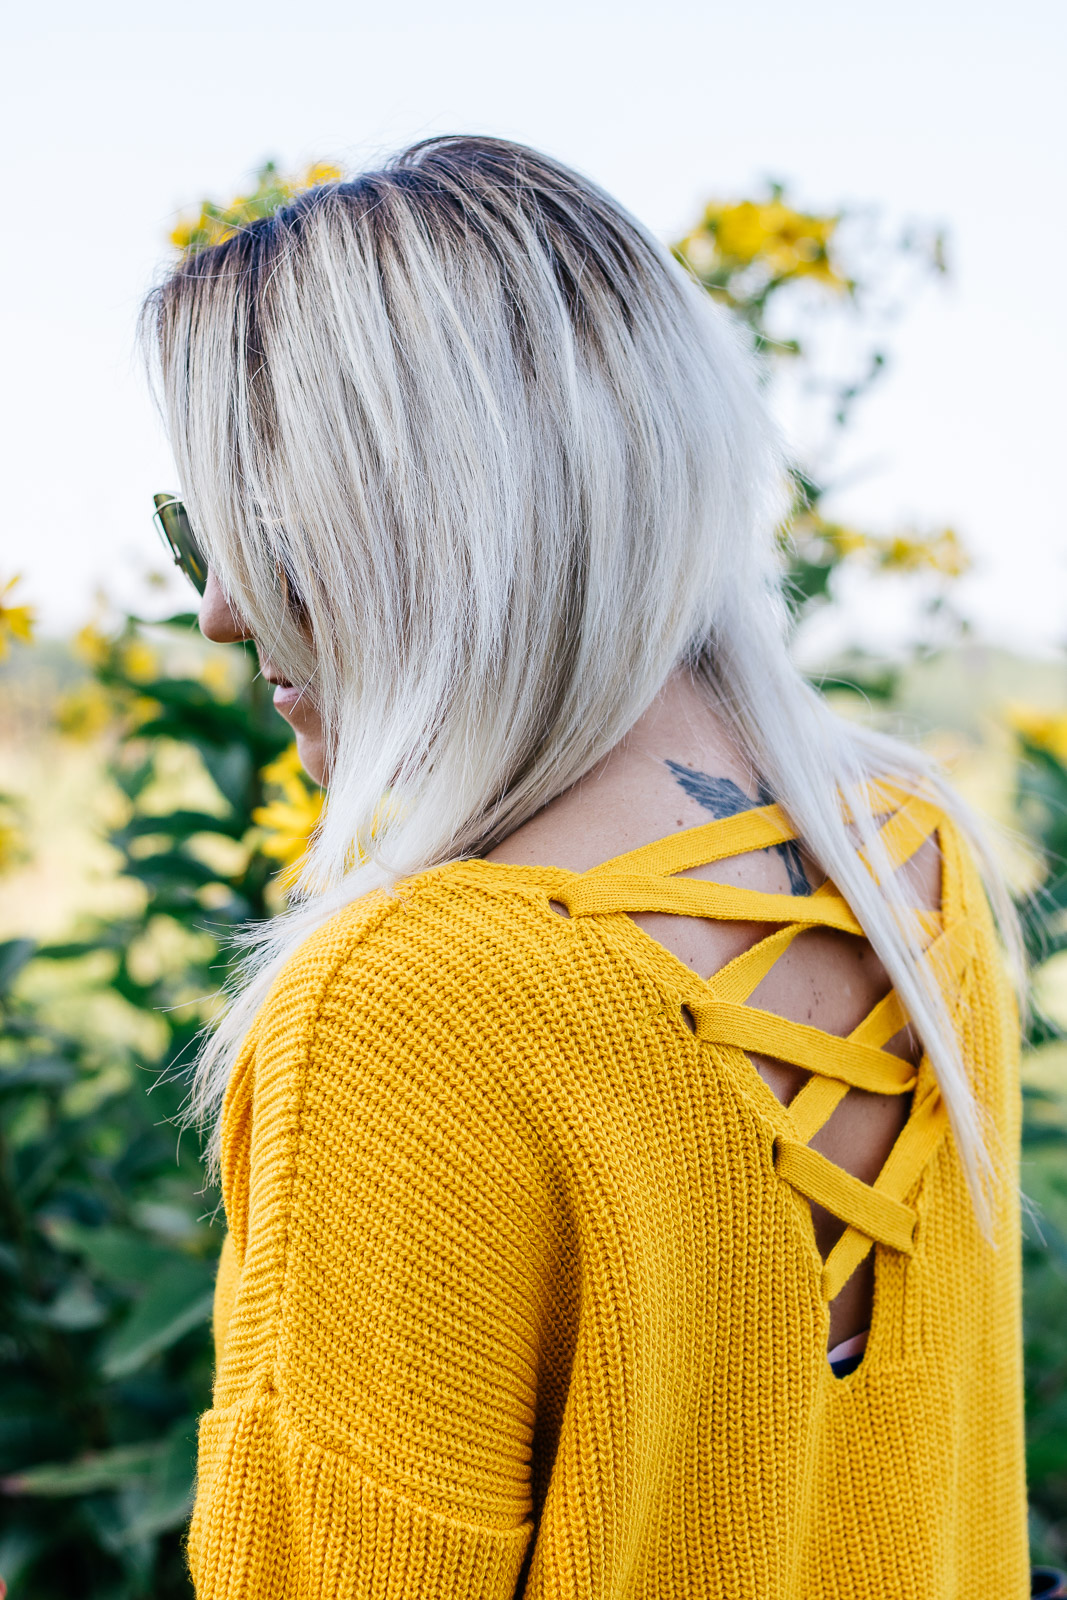 Fall vibes: mustard oversized sweater with suede lace up booties. 